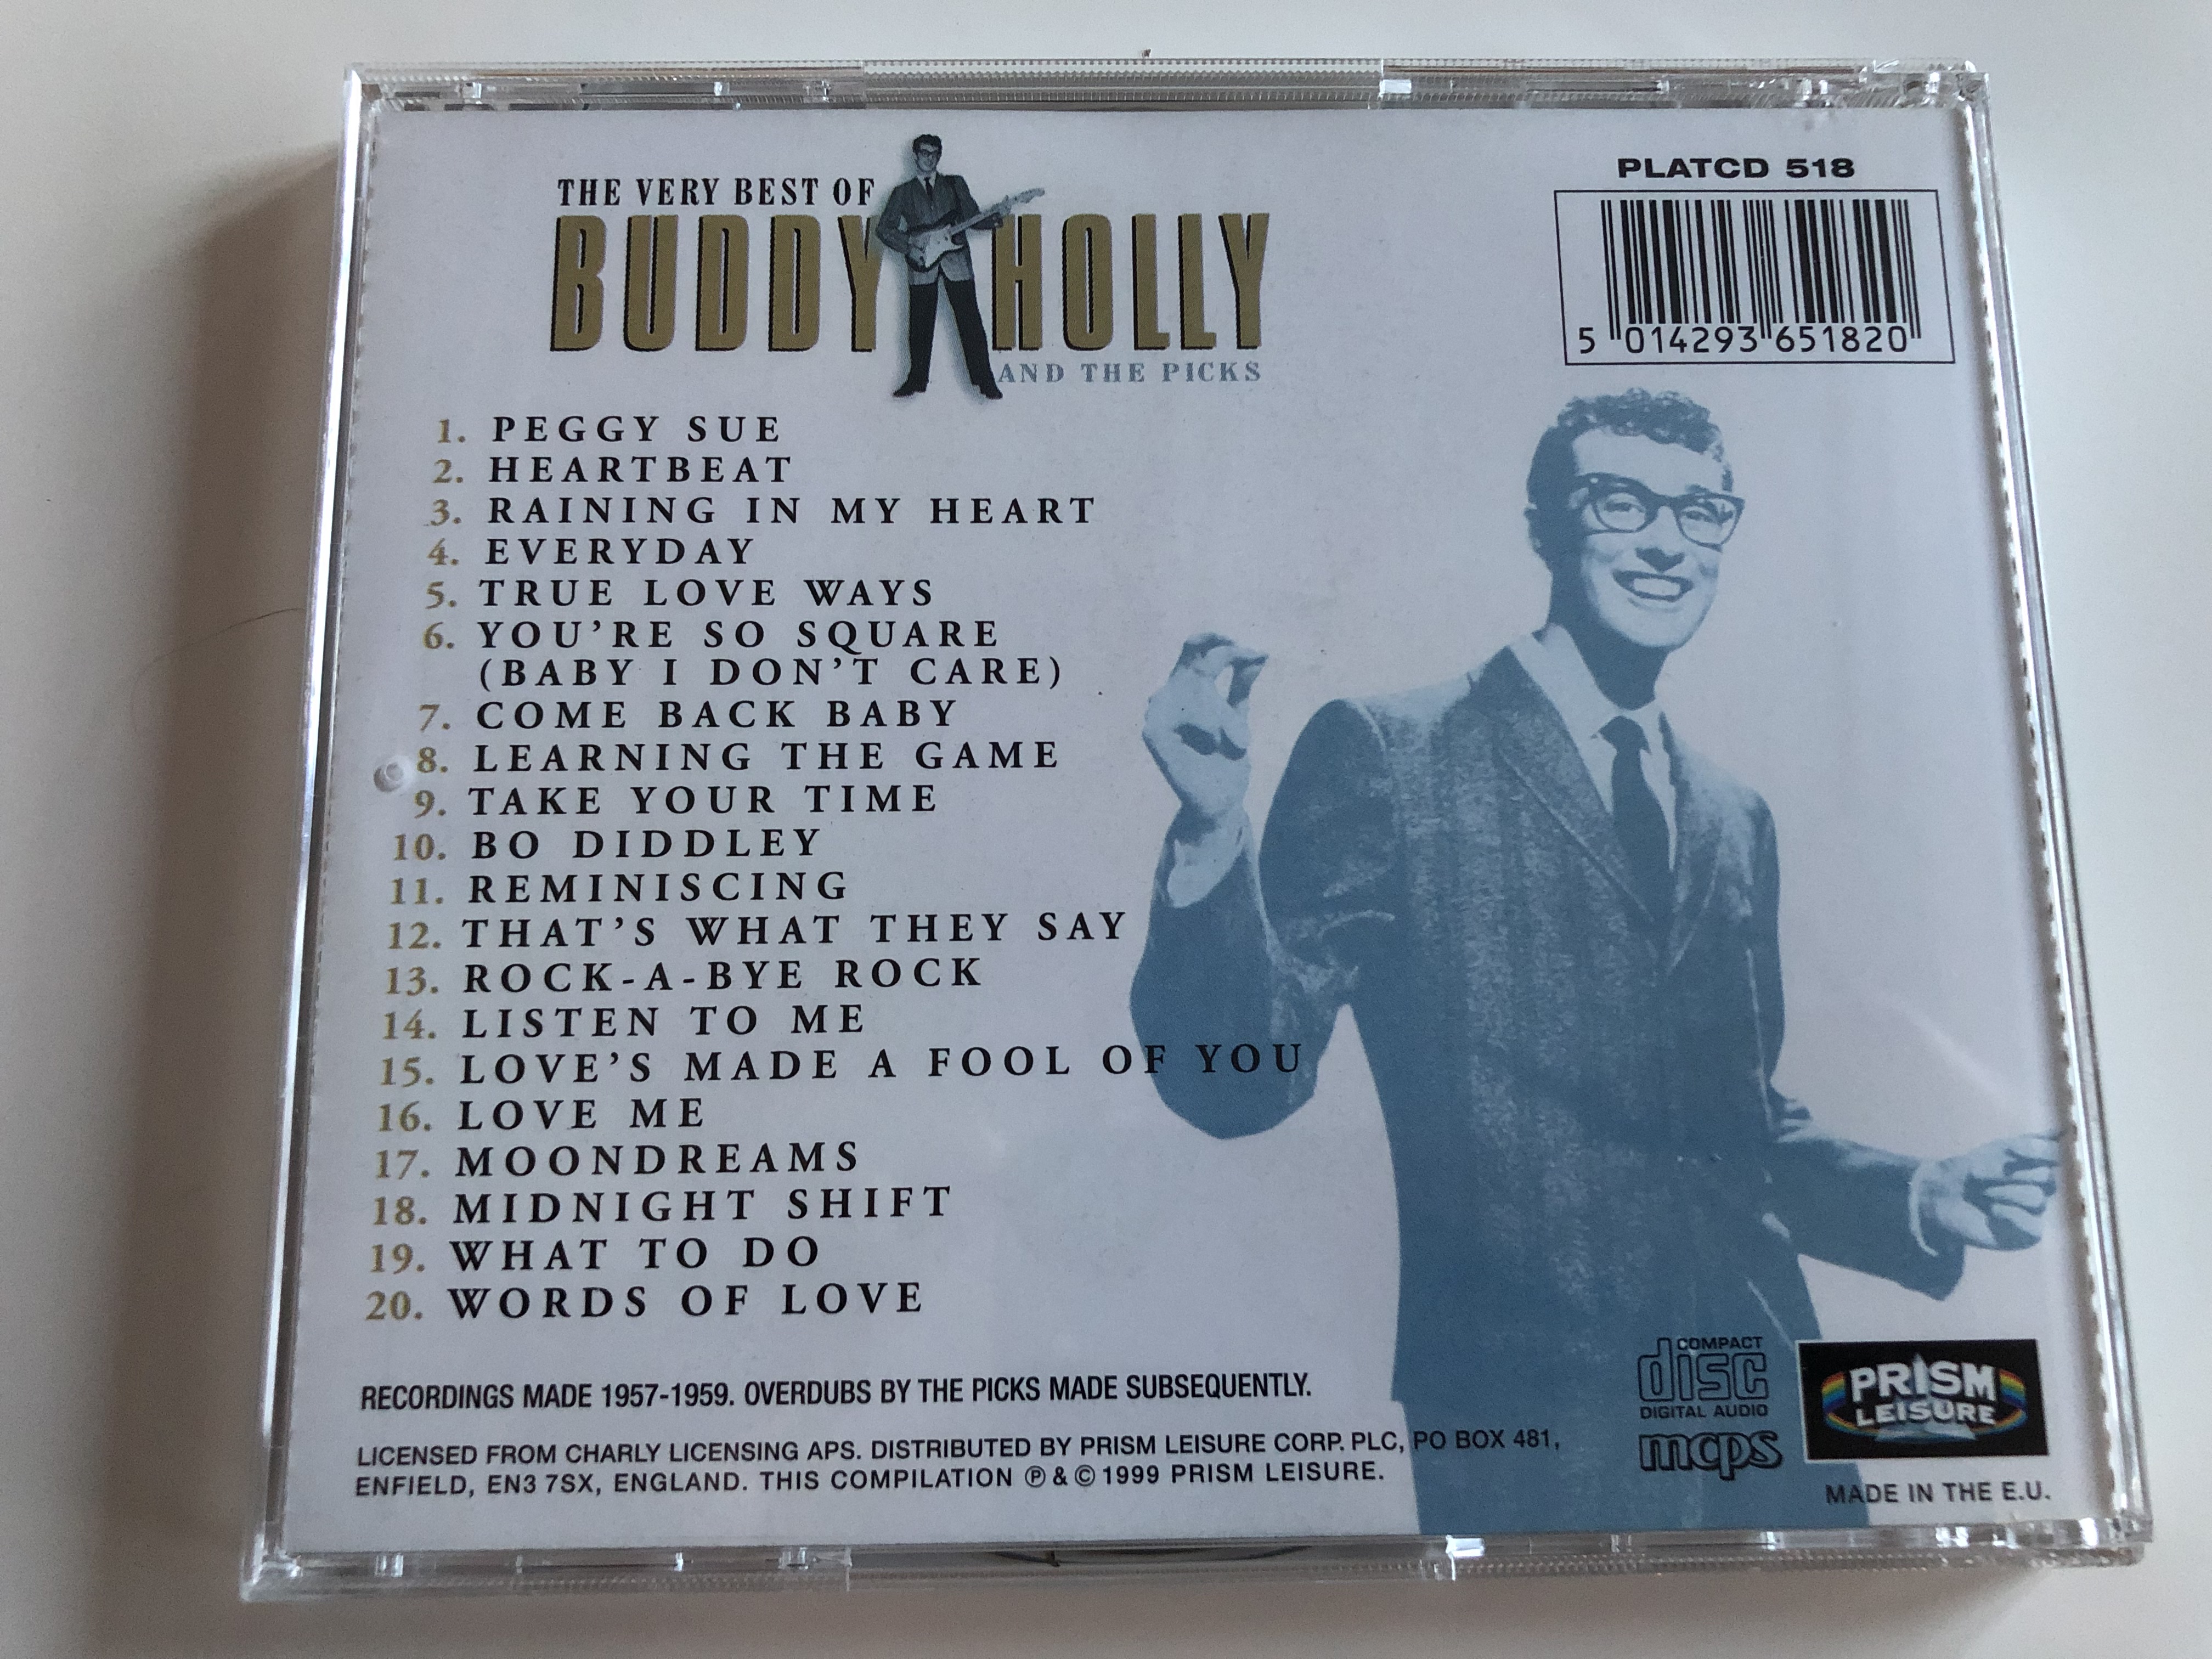 the-very-best-of-buddy-holly-and-the-picks-20-great-songs-including-peggy-sue-heartbeat-words-of-love-true-love-ways-raining-in-my-heart-everyday-audio-cd-1999-prism-leisure-platcd-518-4-.jpg